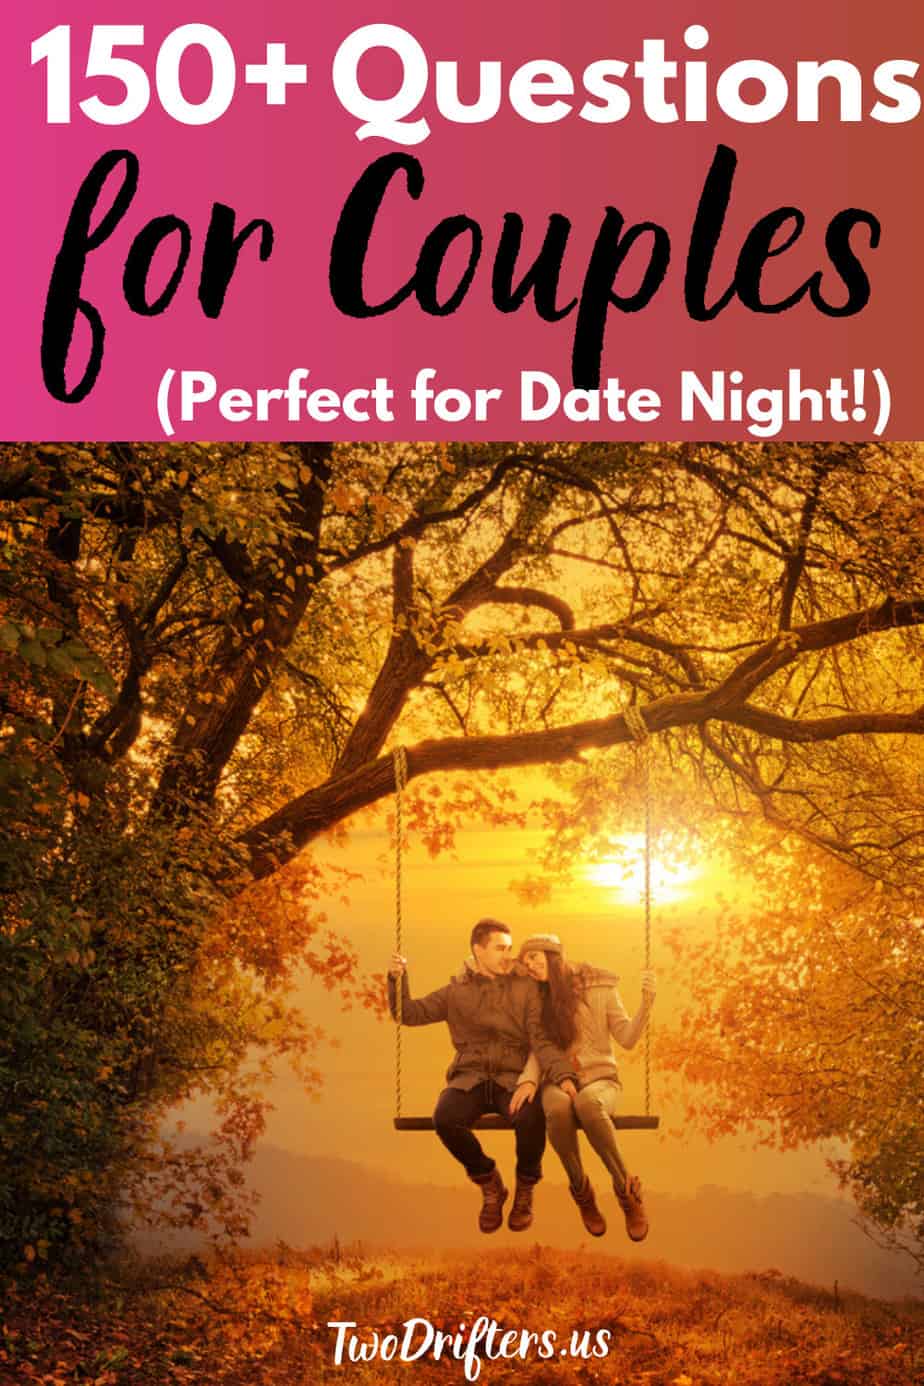 Pinterest social share image that says "150+ Questions for Couples (Perfect for Date Night!)."